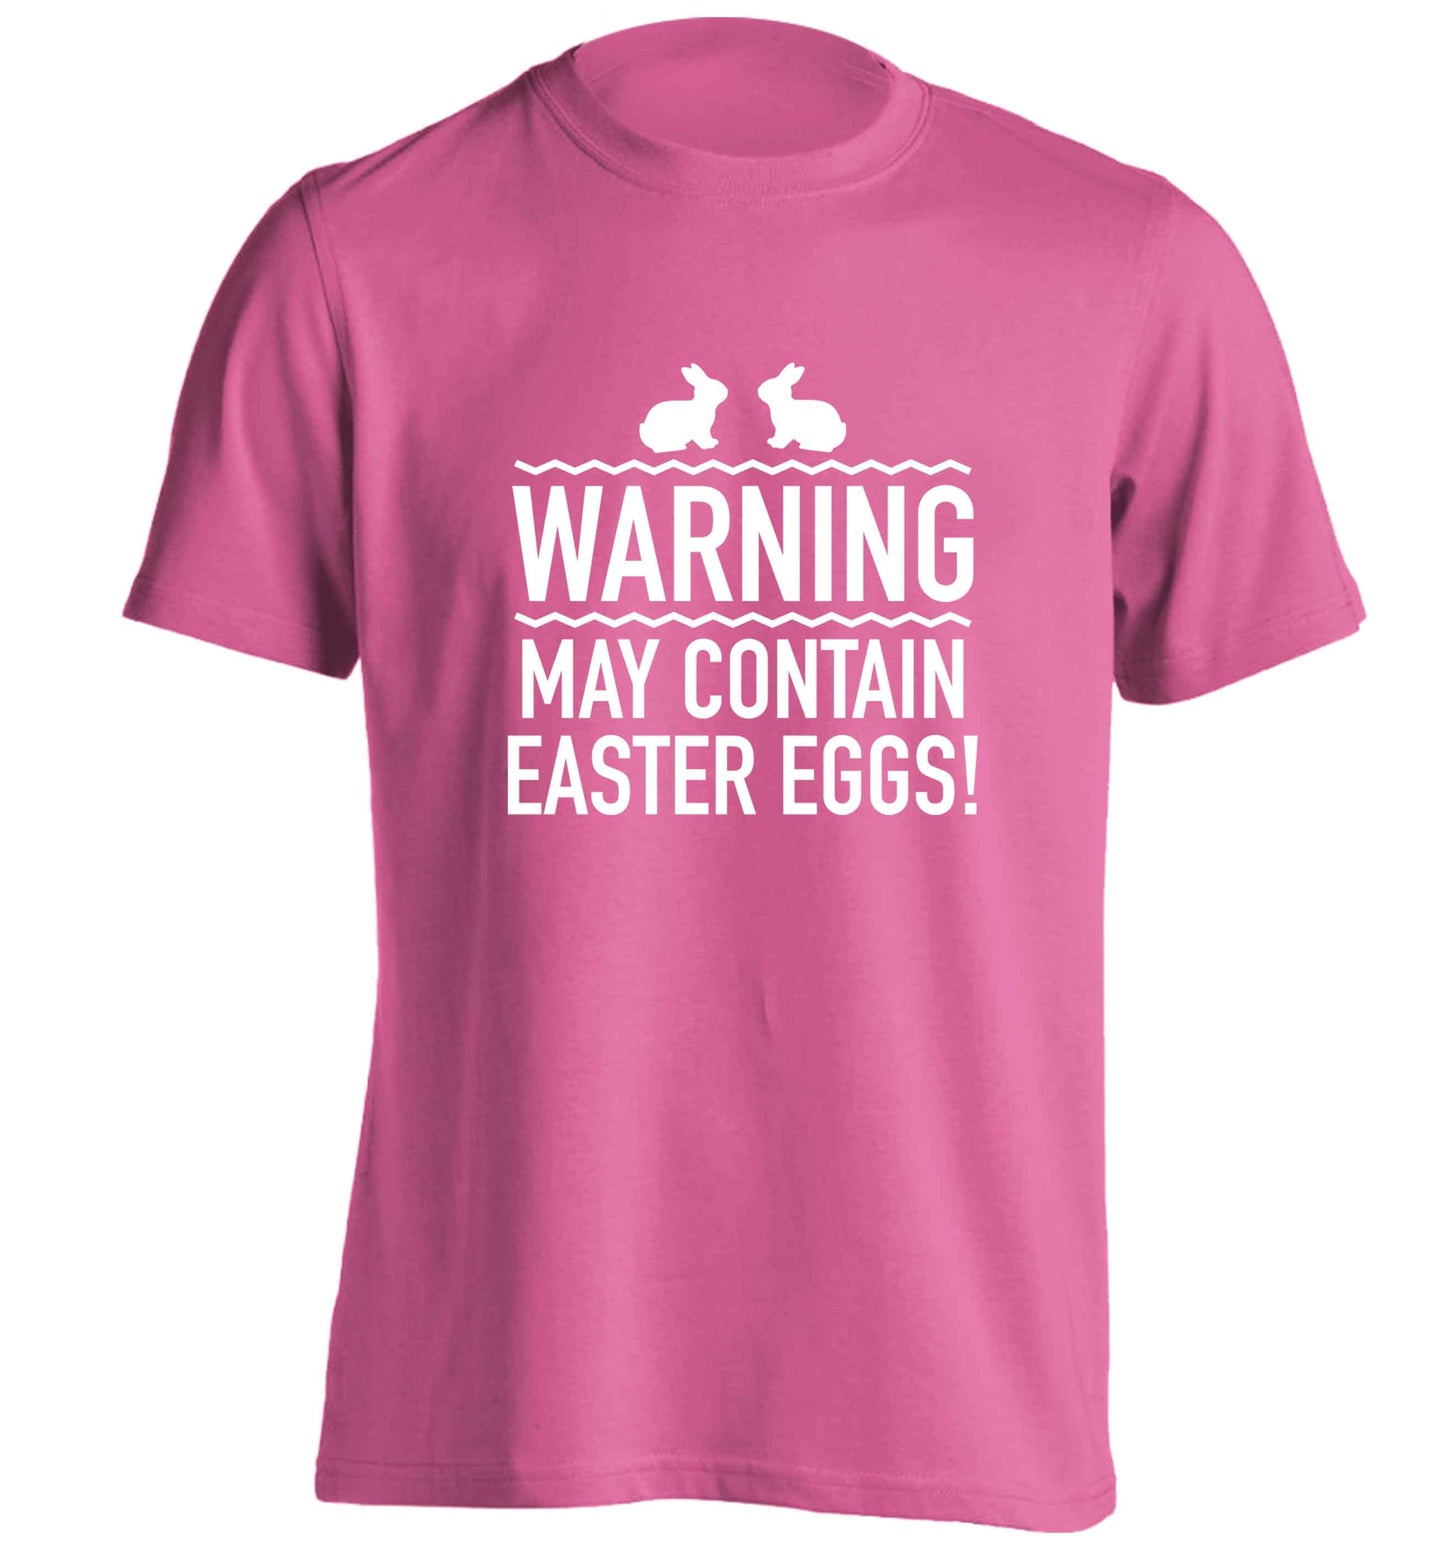 Warning may contain Easter eggs adults unisex pink Tshirt 2XL